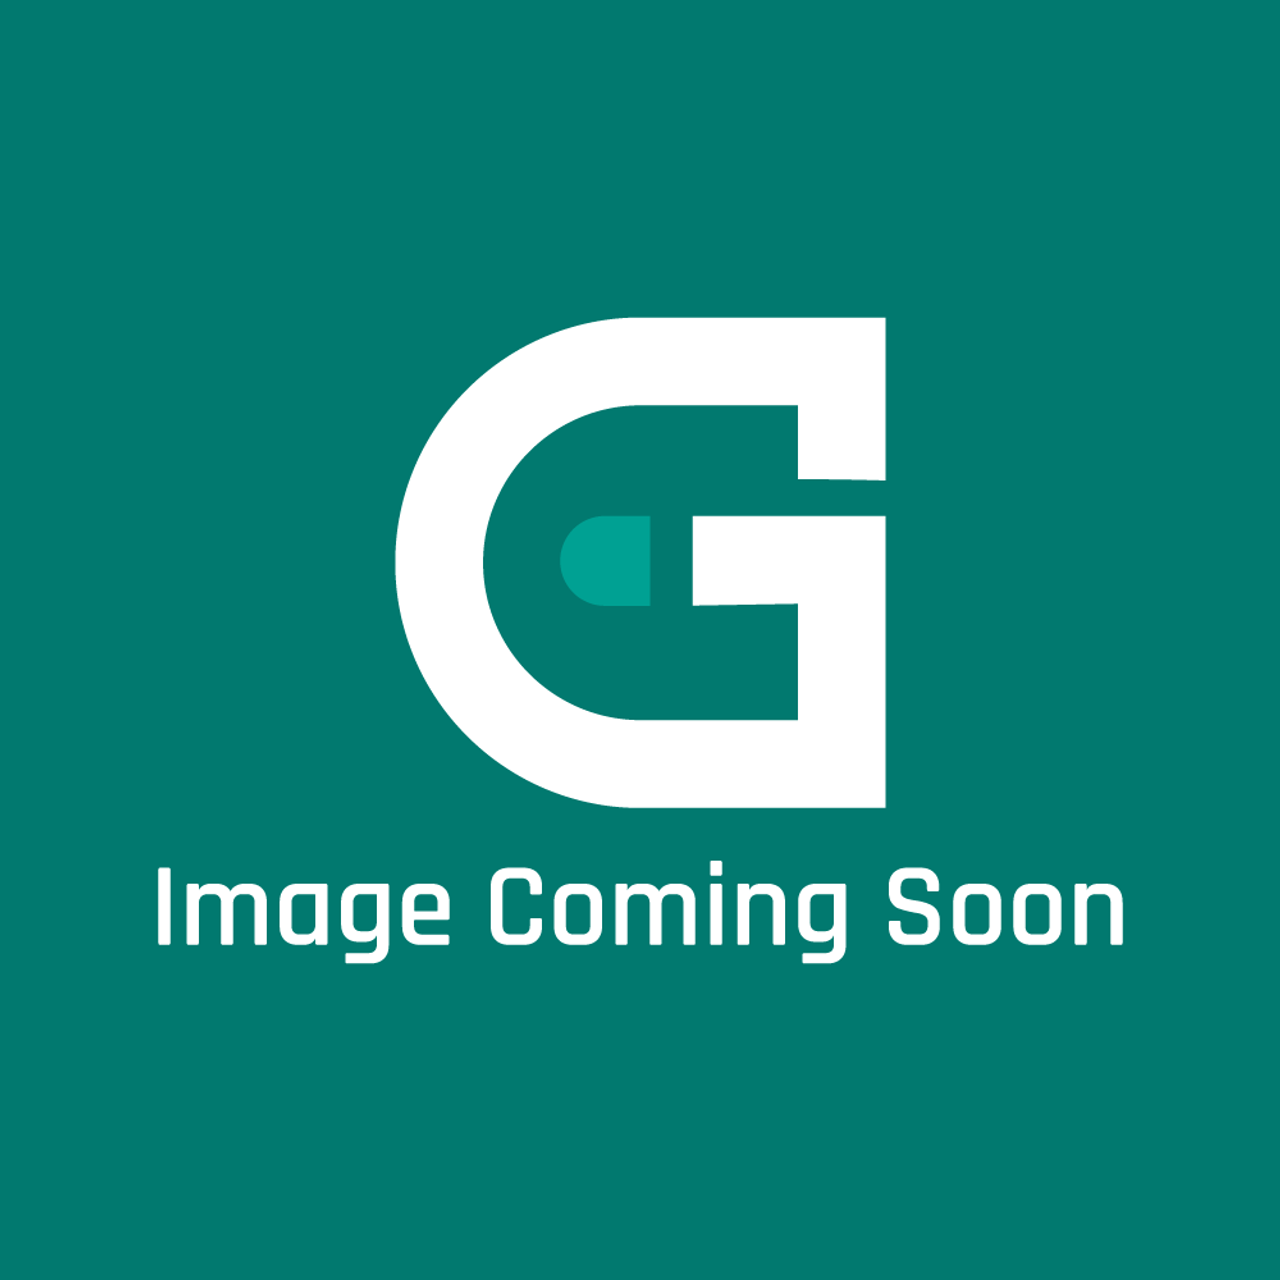 Garland CK1729302 - Fd To Oven Valve Tube Ki T - Image Coming Soon!